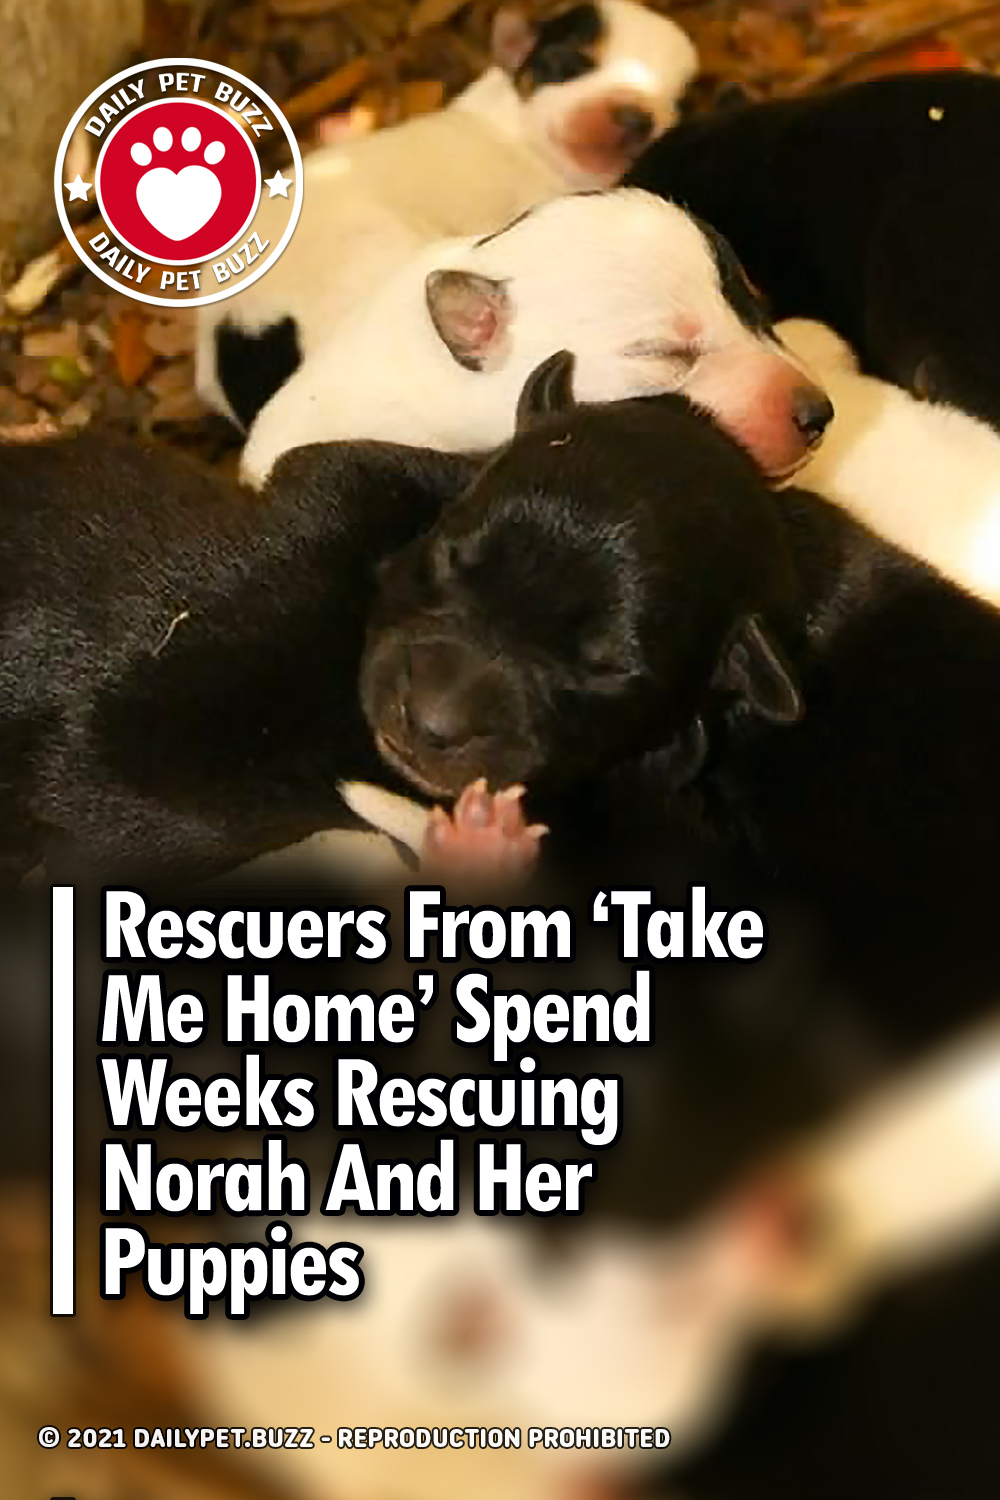 Rescuers From \'Take Me Home\' Spend Weeks Rescuing Norah And Her Puppies